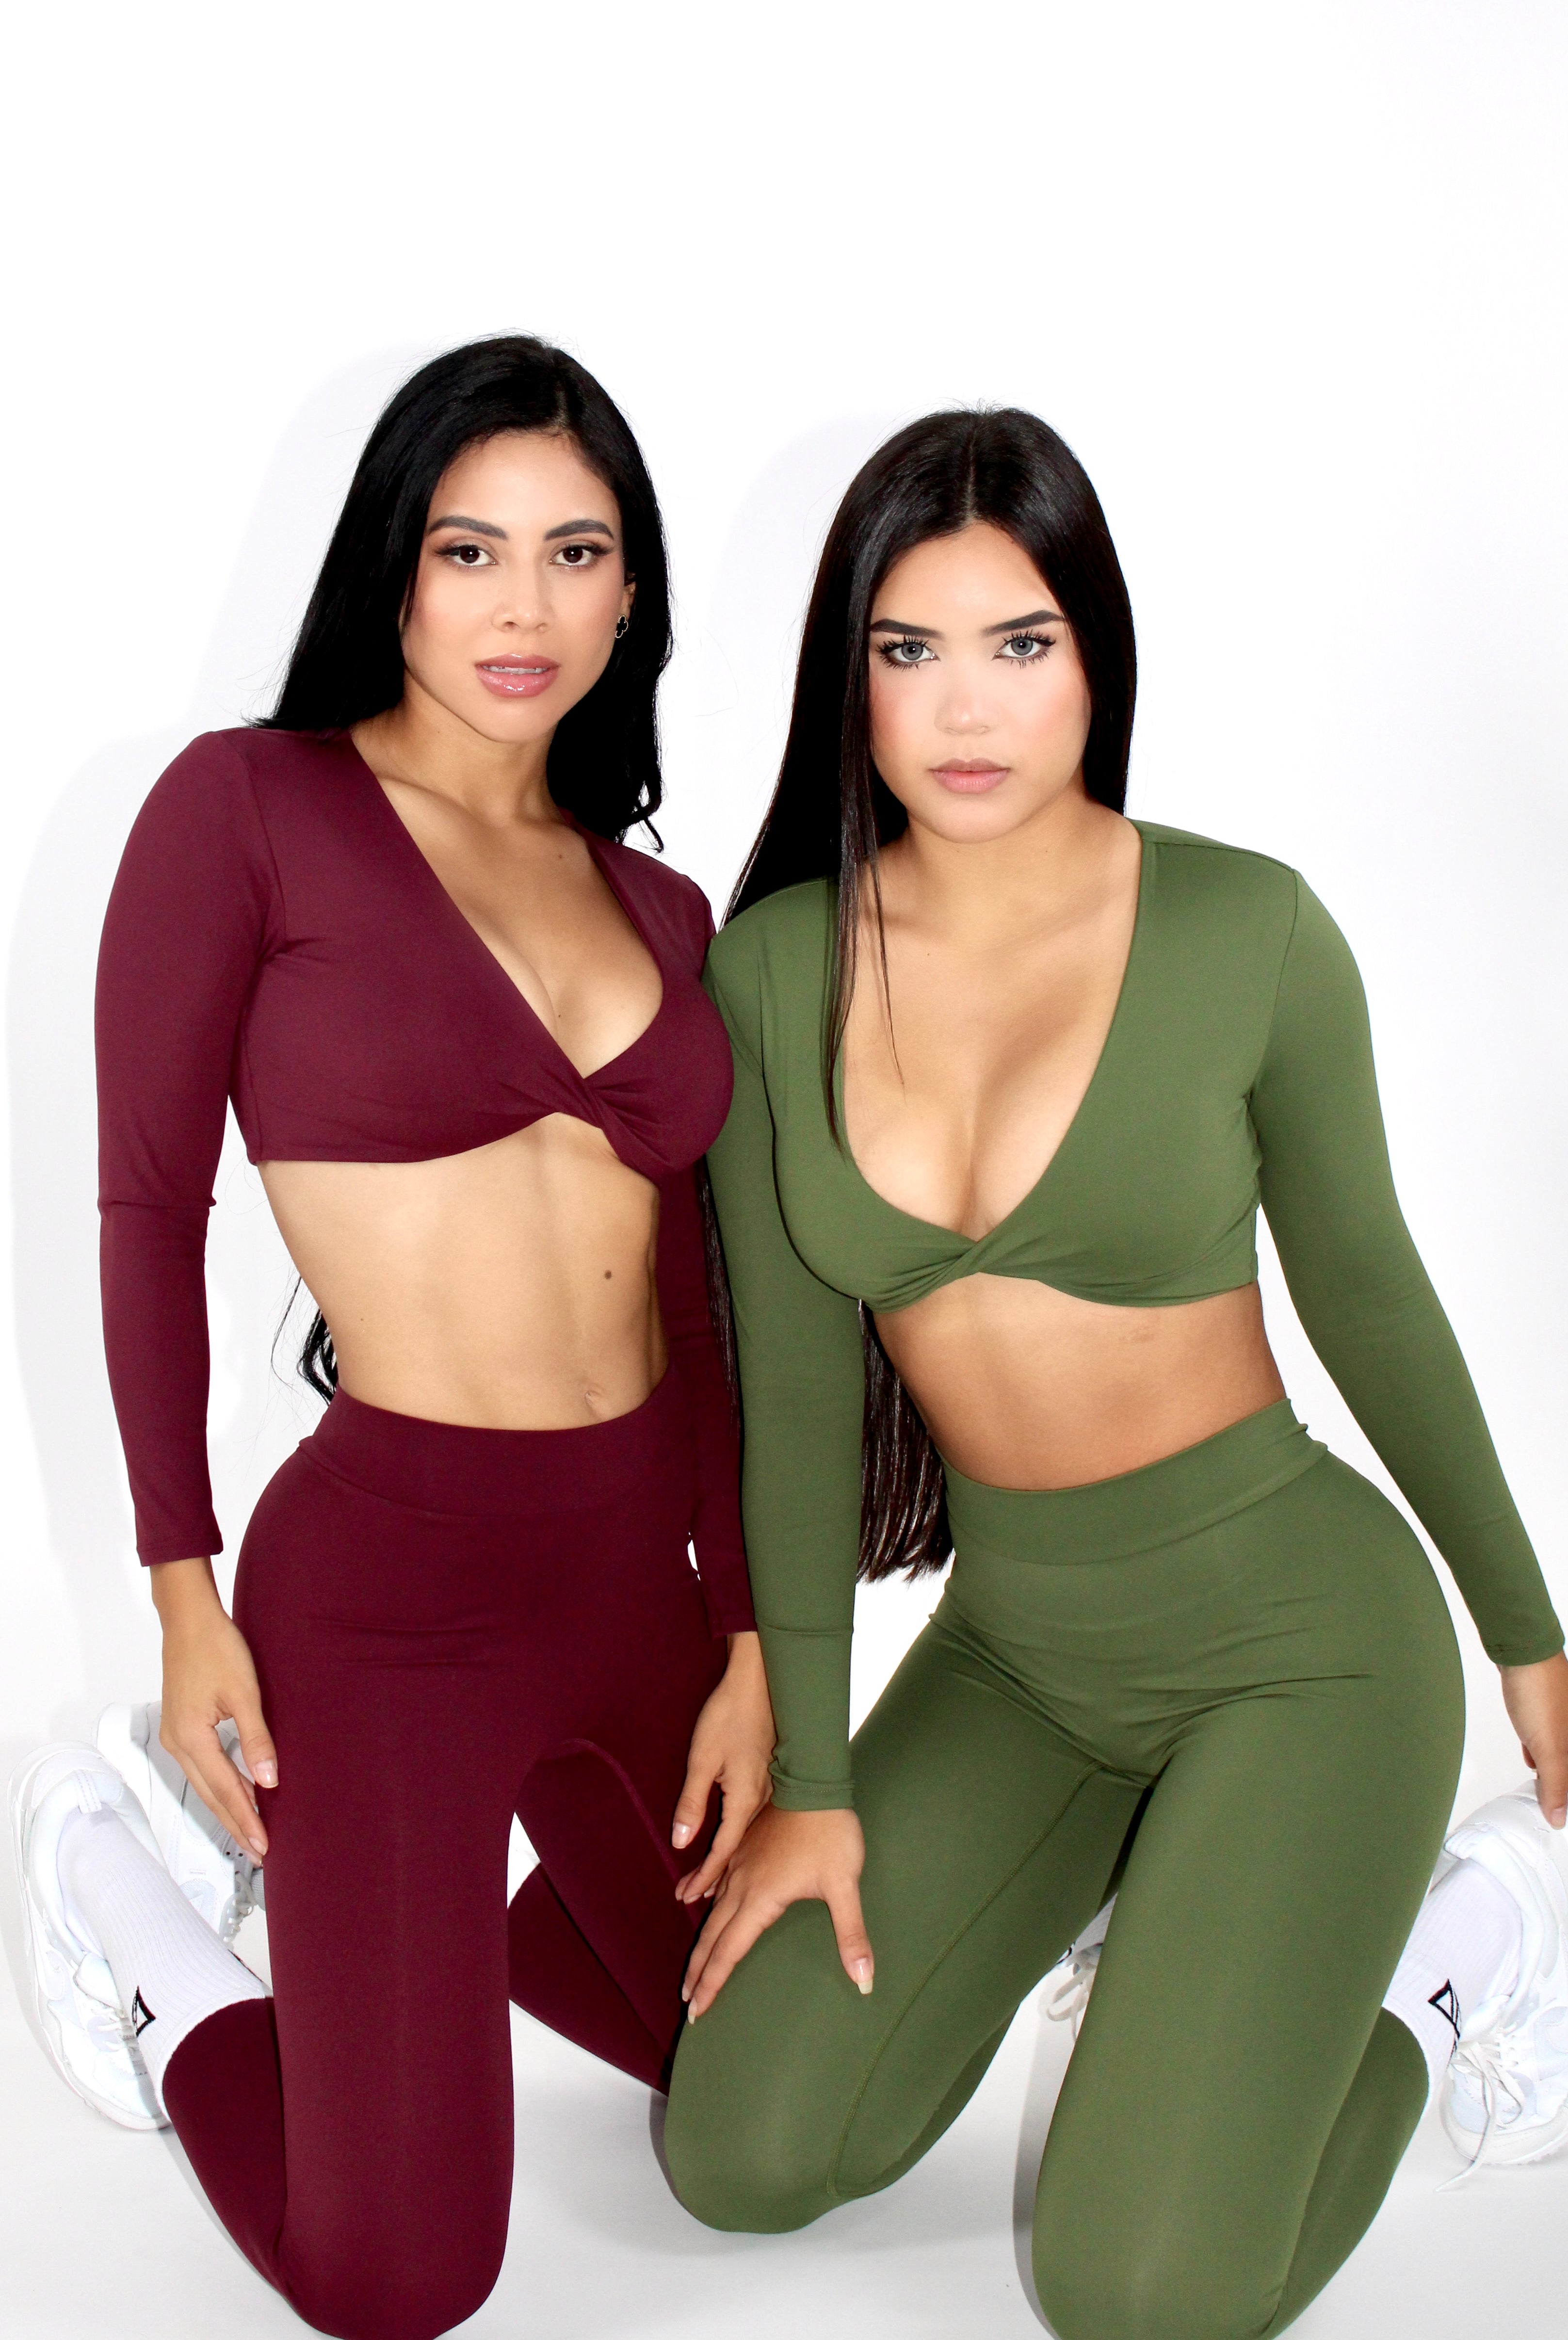 MILA MVMT Sportswear Gym Wear Workout Athleisure Crop Top Long Sleeve fern green and cranberry burgundy color facing front on knees